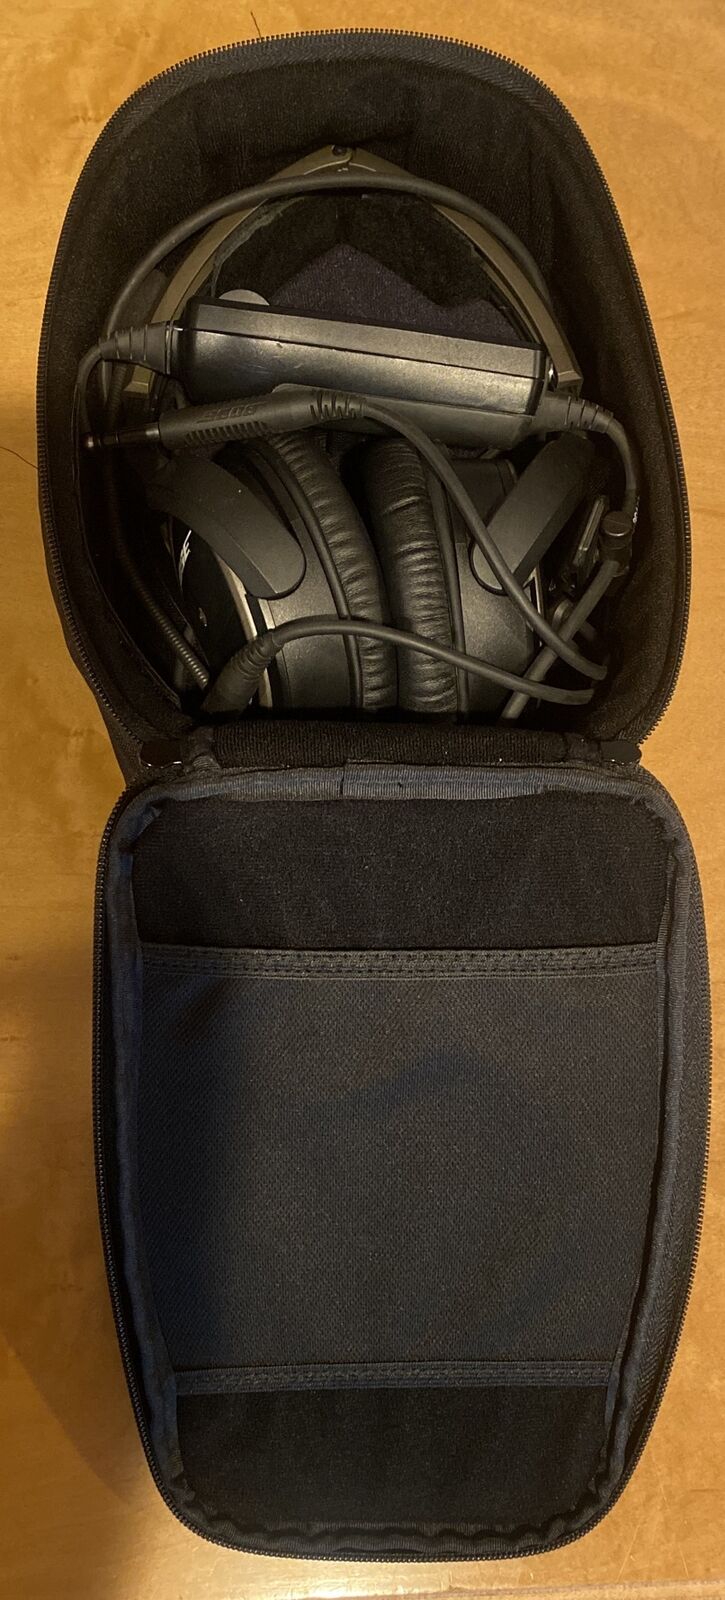 Bose A20 Aviation Headset  with soft case